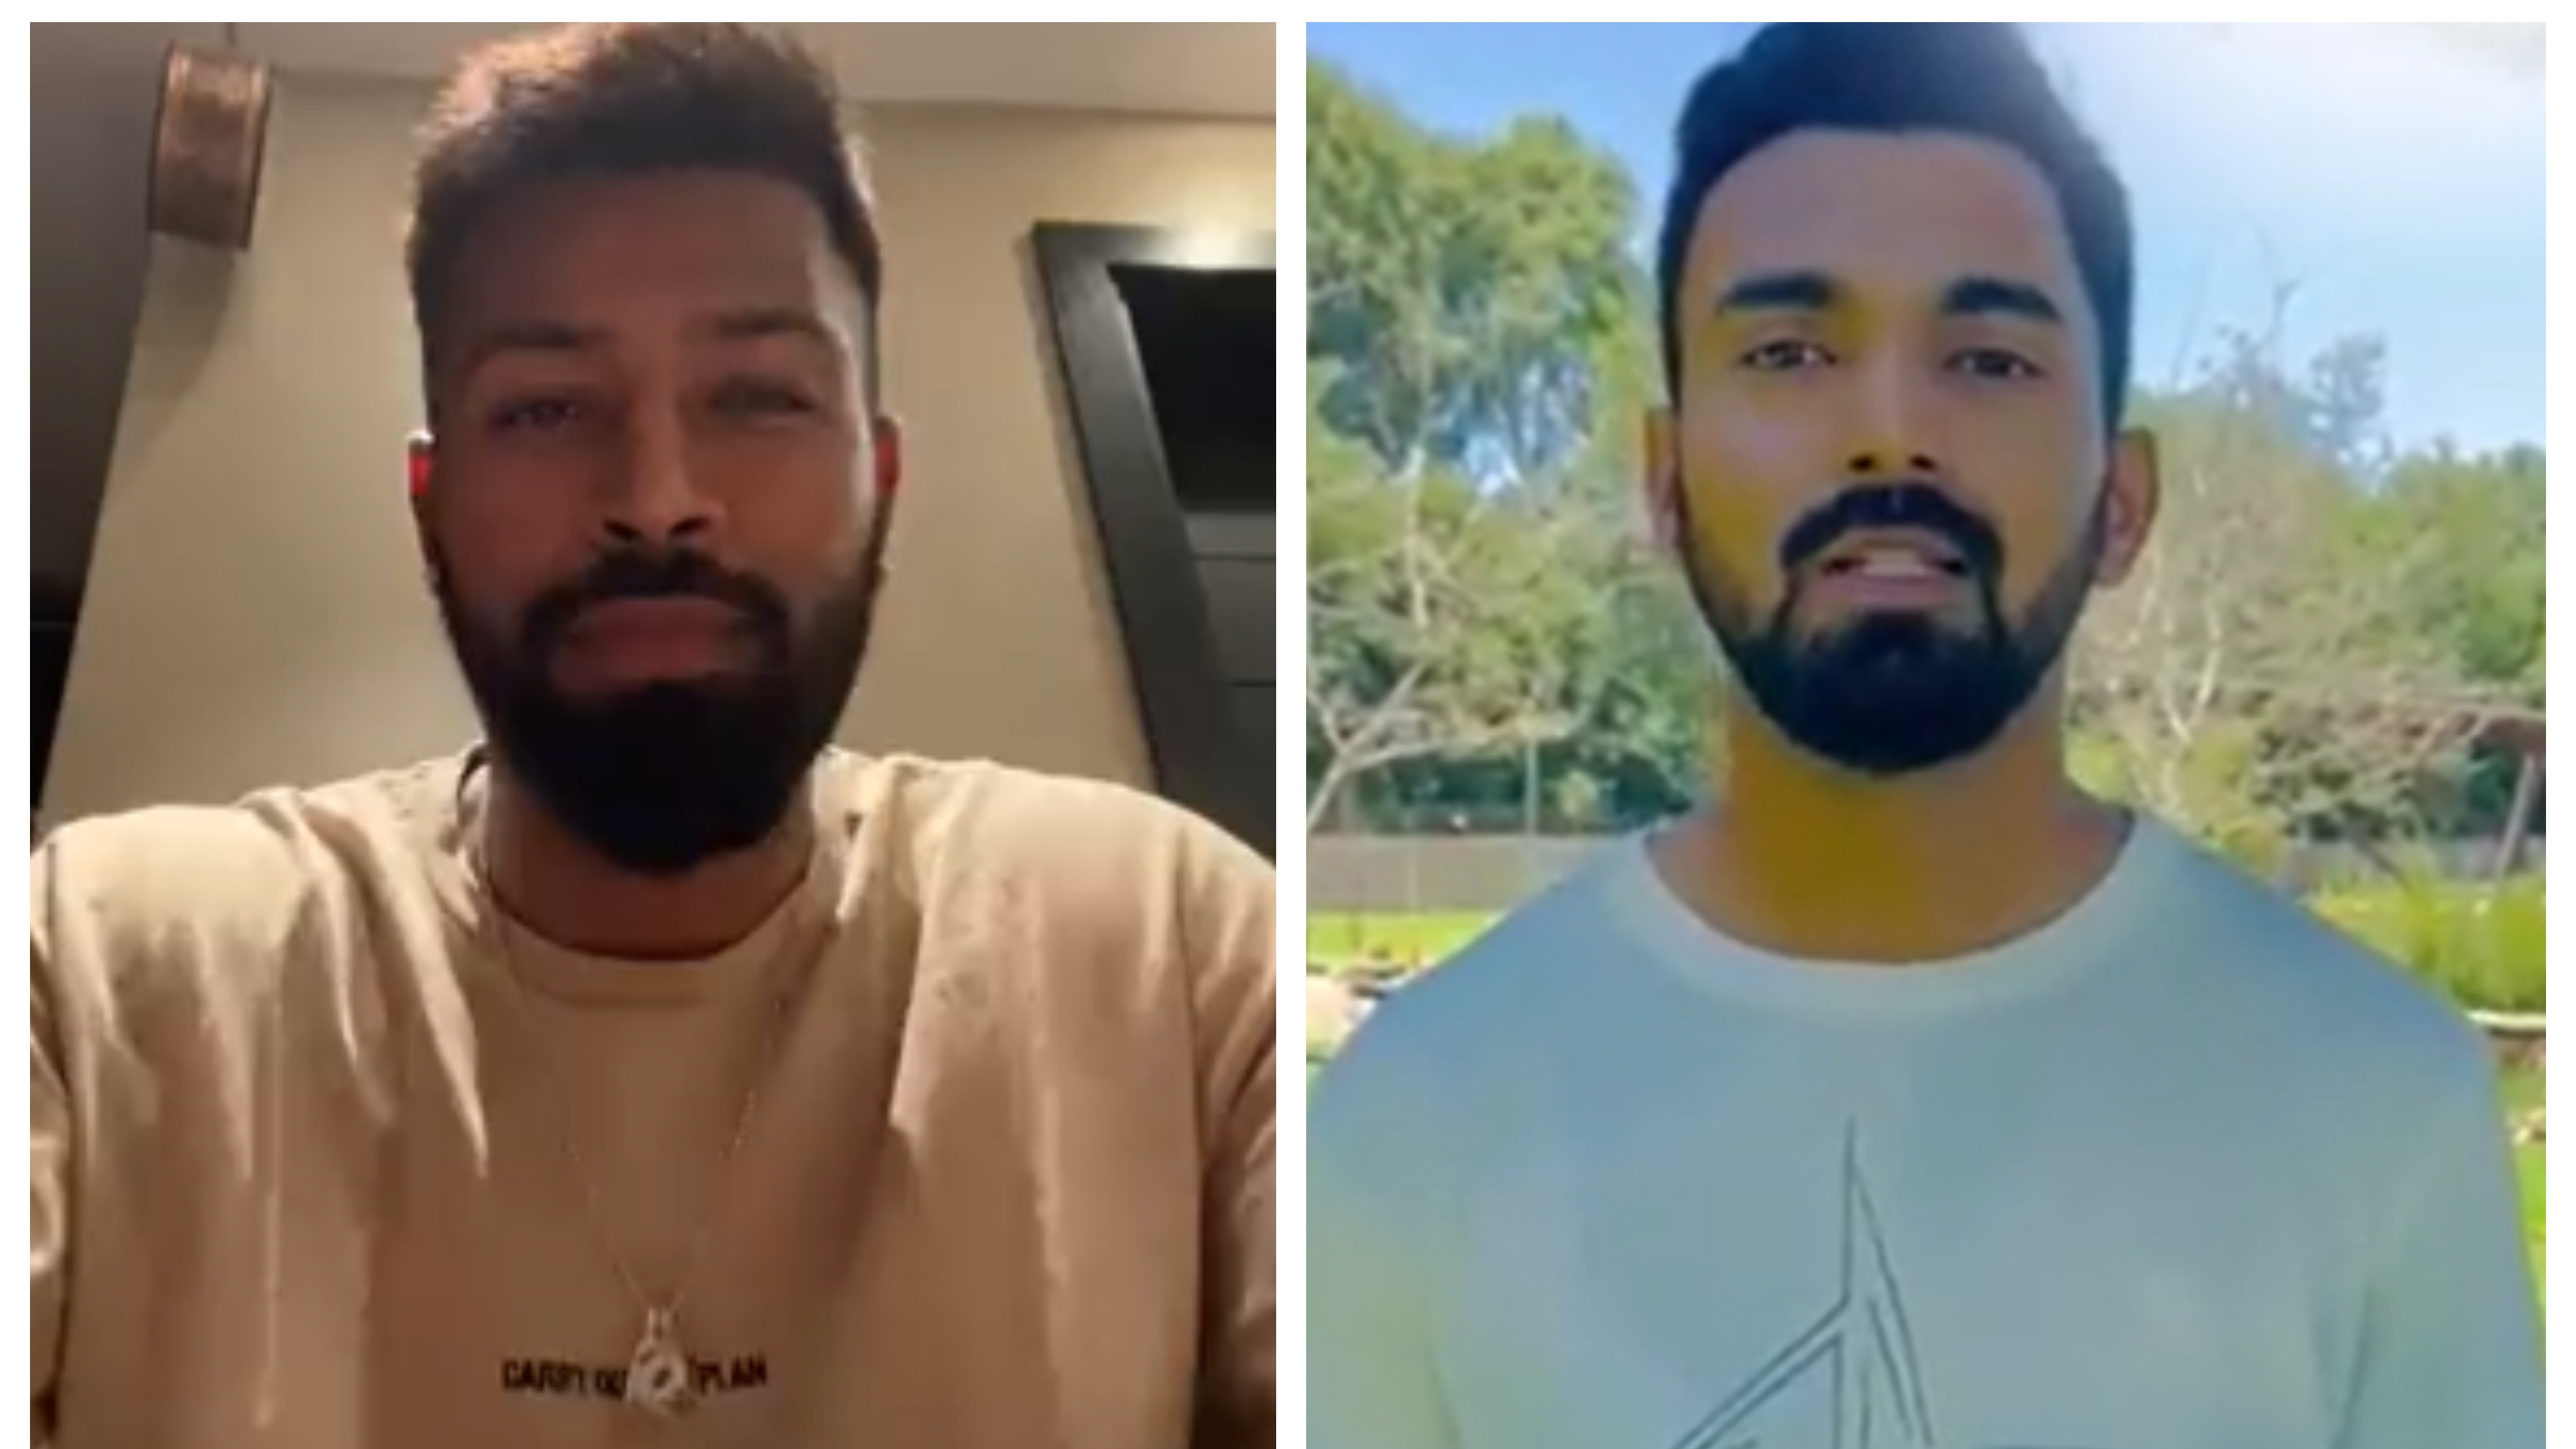 IPL 2022: WATCH – Hardik Pandya and KL Rahul’s messages after being named captains by two new IPL teams